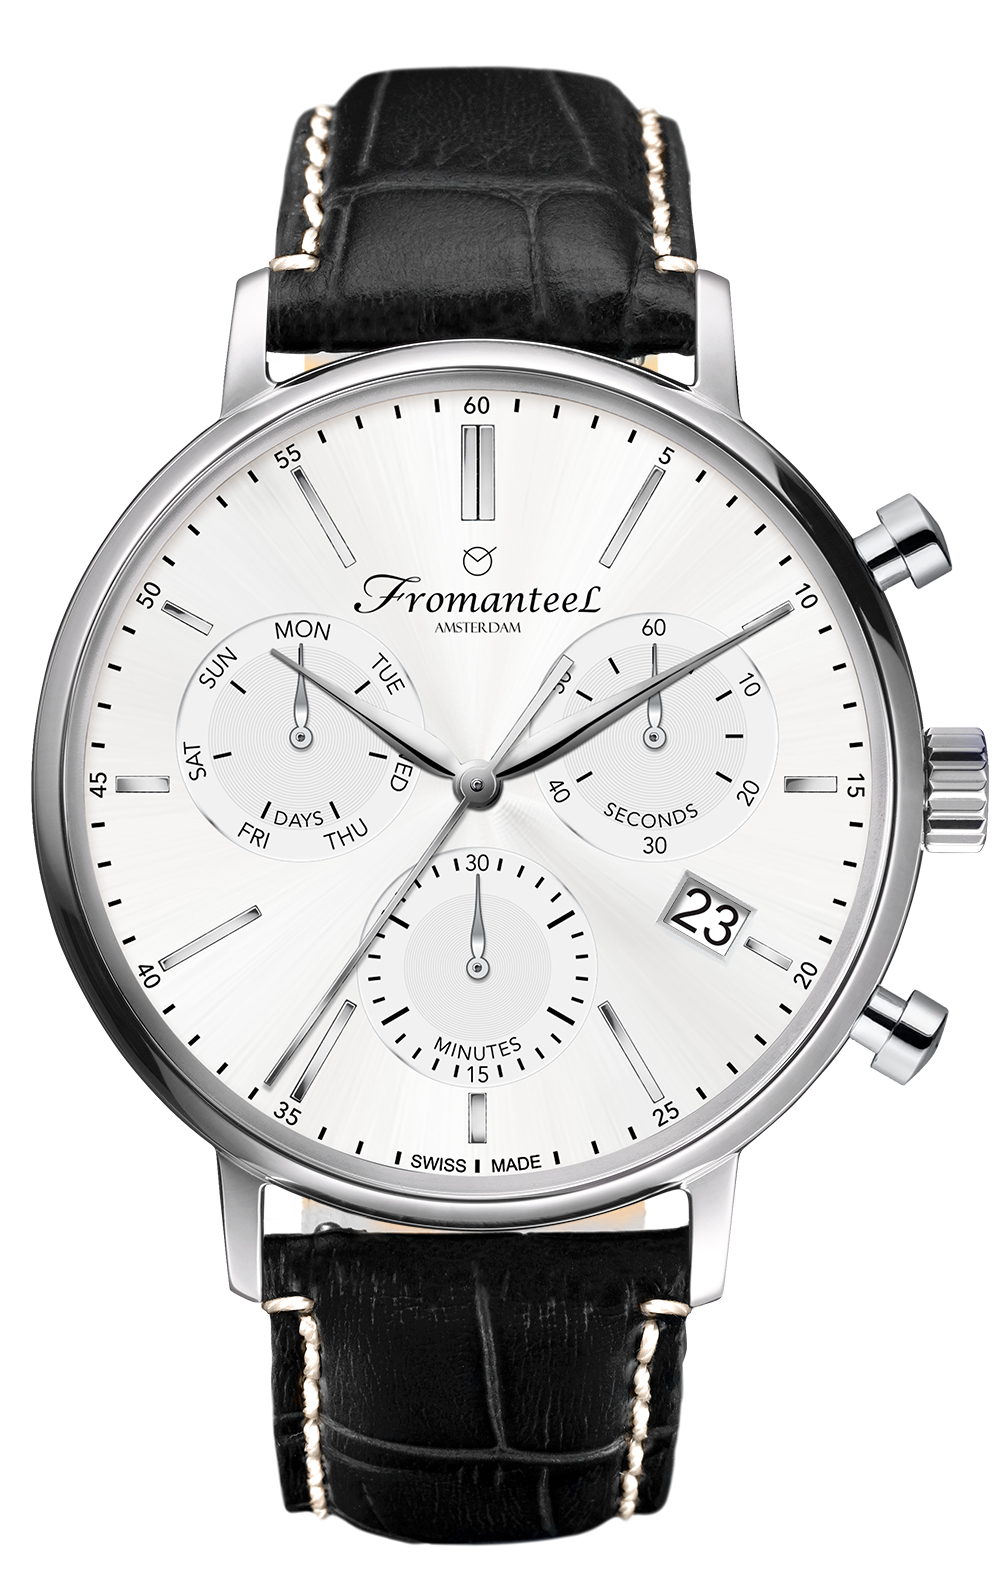 Swiss Made Men's Watch Fromanteel Generations White Chronograph